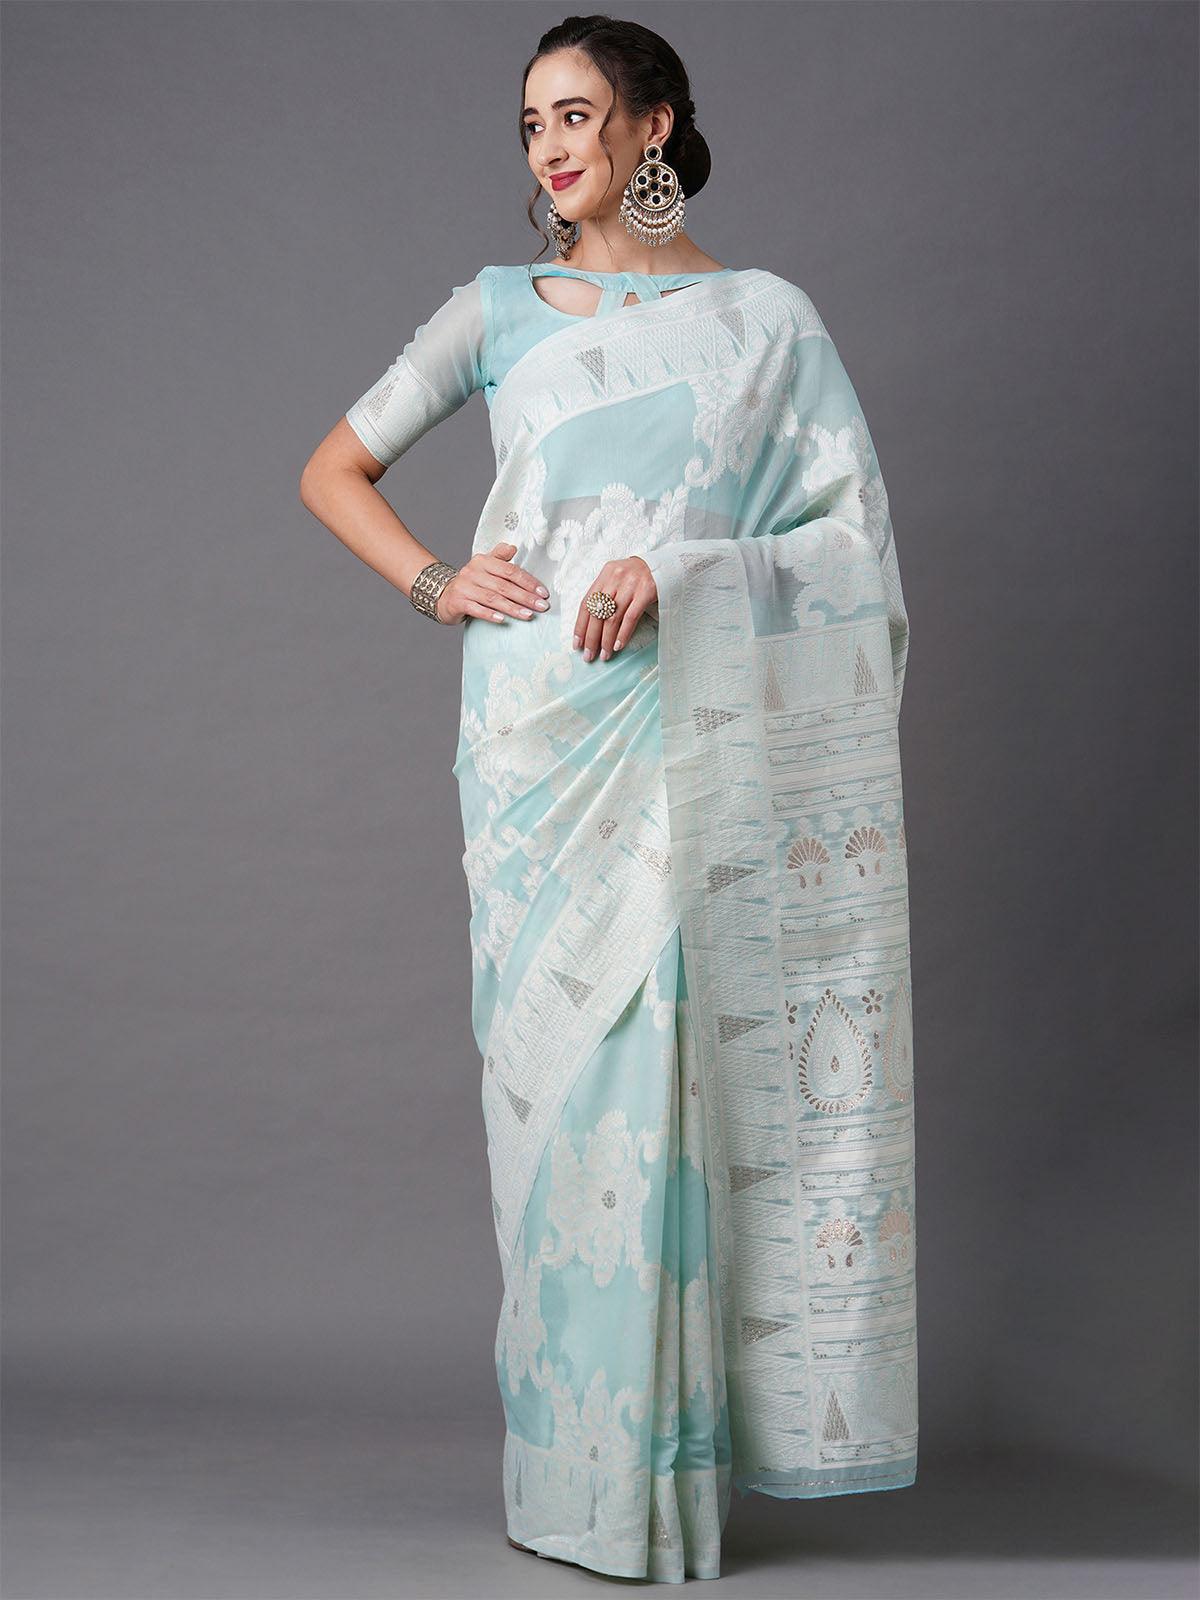 Women's Sea Green Festive Silk Blend Woven Design Saree With Unstitched Blouse - Odette